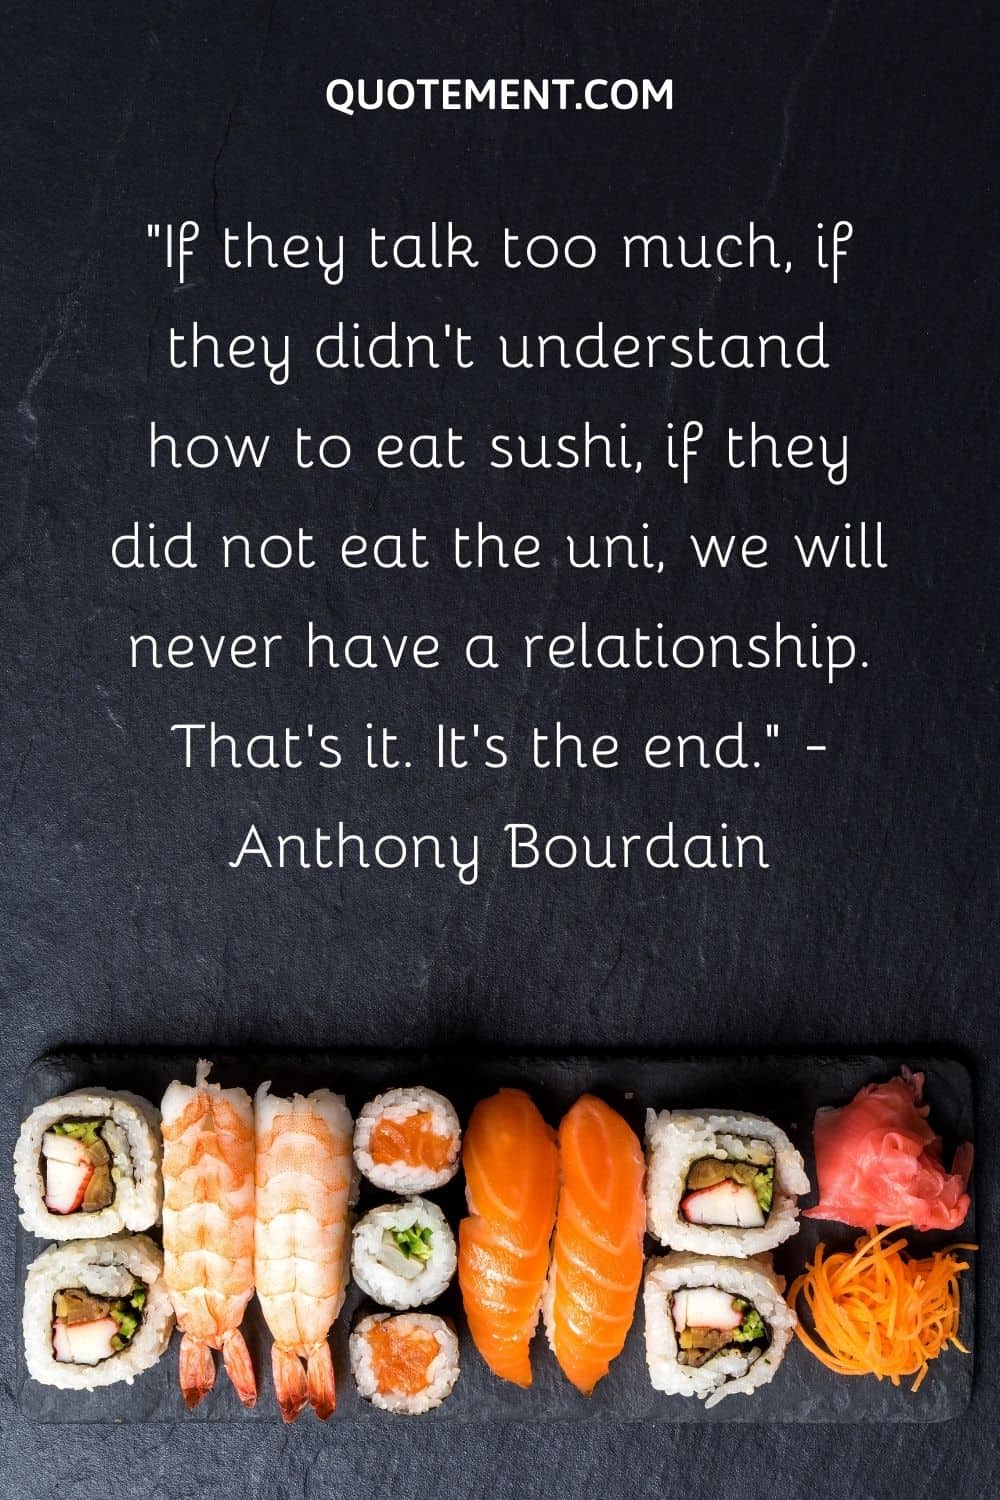 If they didn't understand how to eat sushi, we will never have a relationship